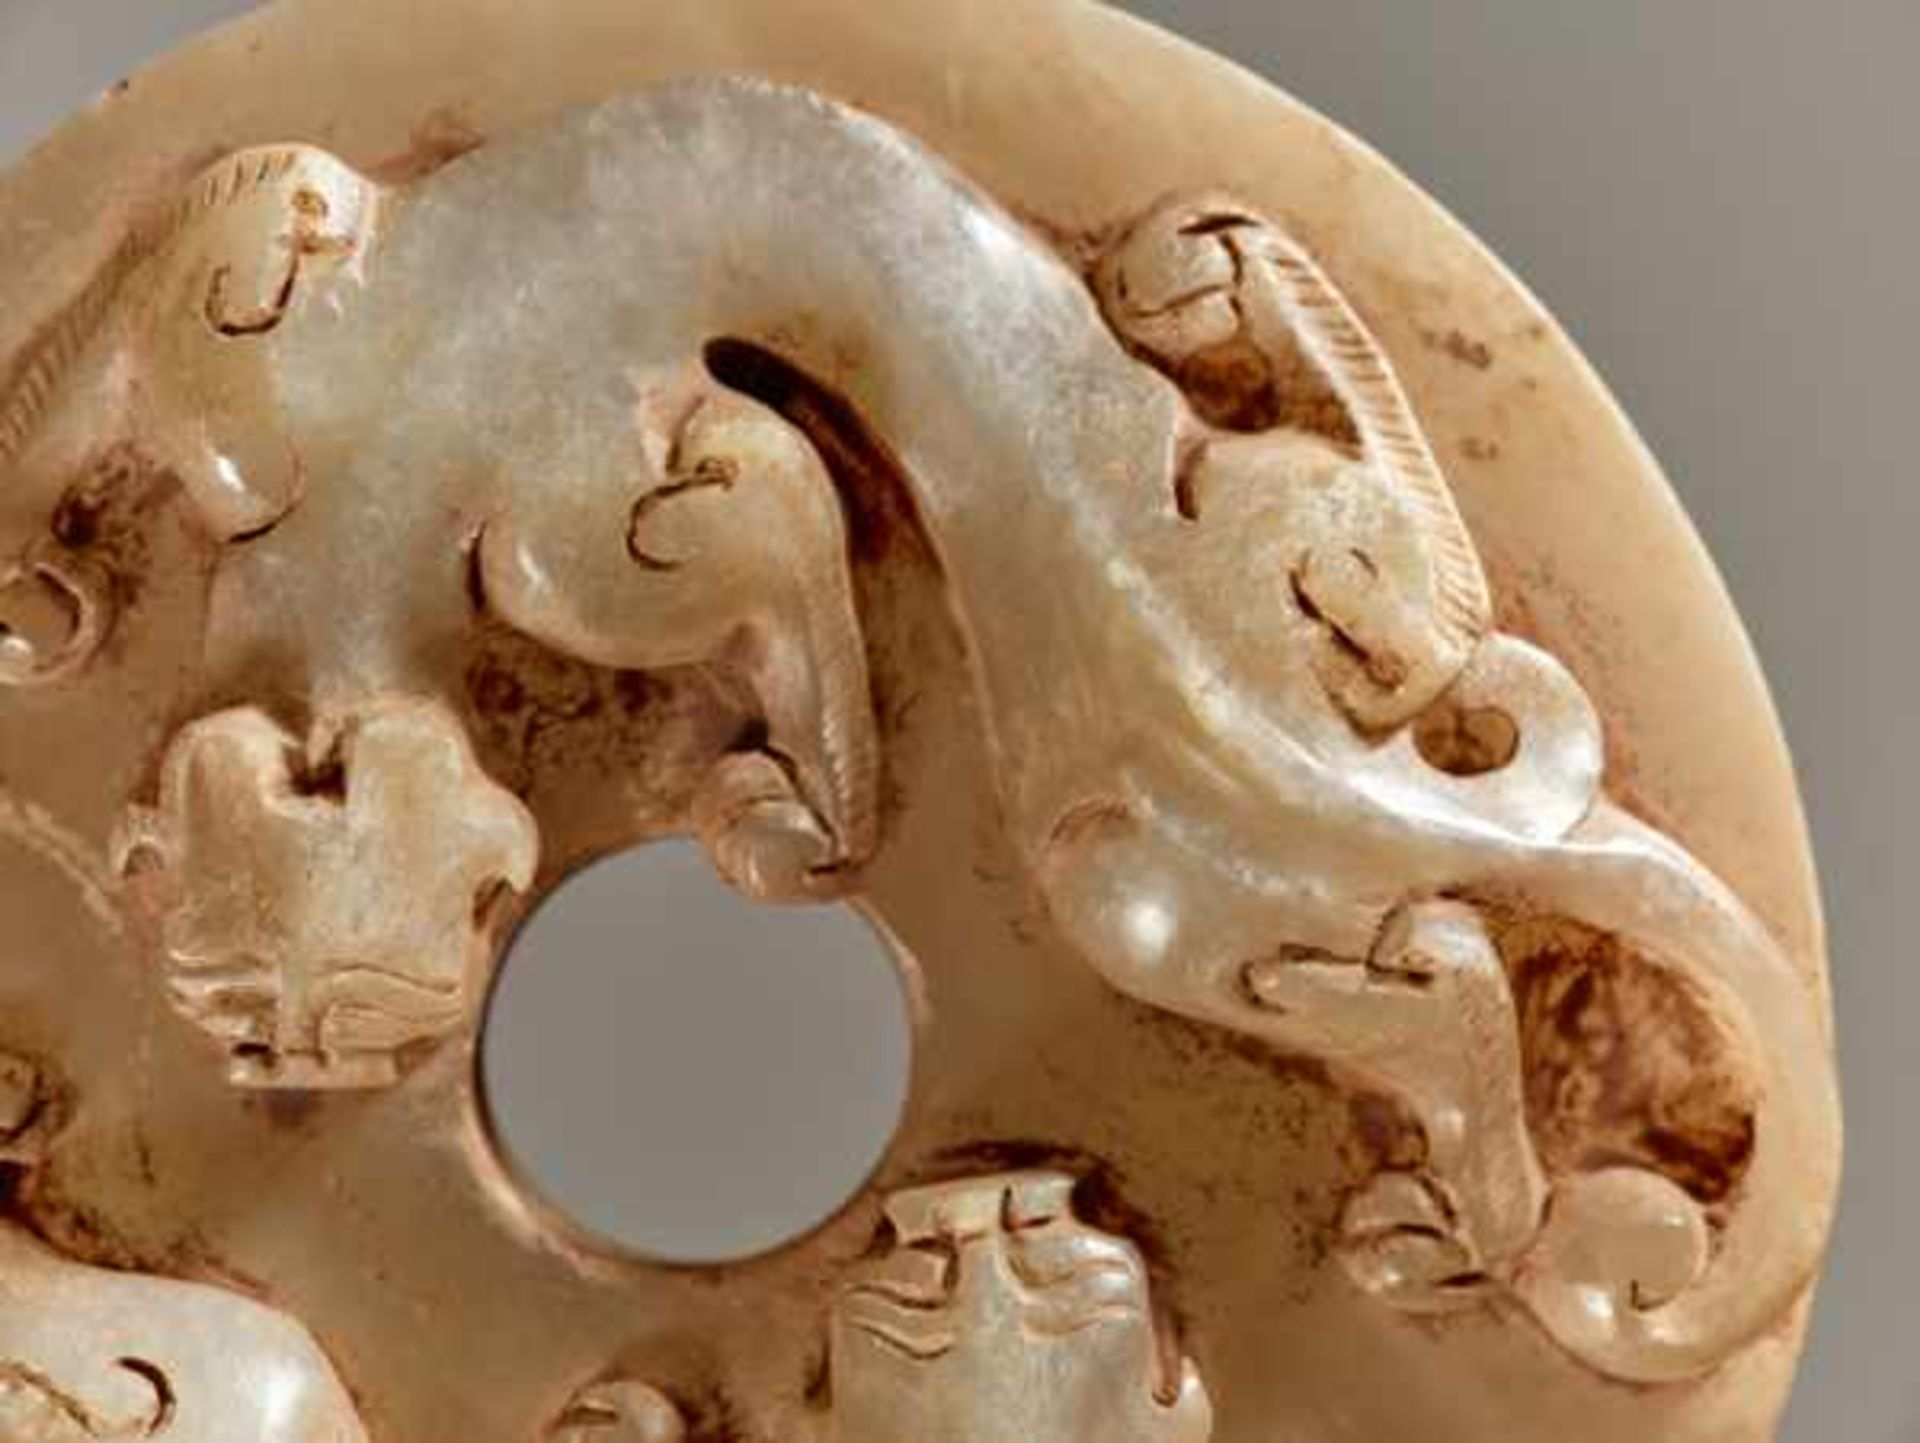 AN IMPRESSIVE WHITE JADE SWORD POMMEL WITH TWO DRAGONS CARVED IN RELIEF Jade, China. Western Han, - Image 5 of 9